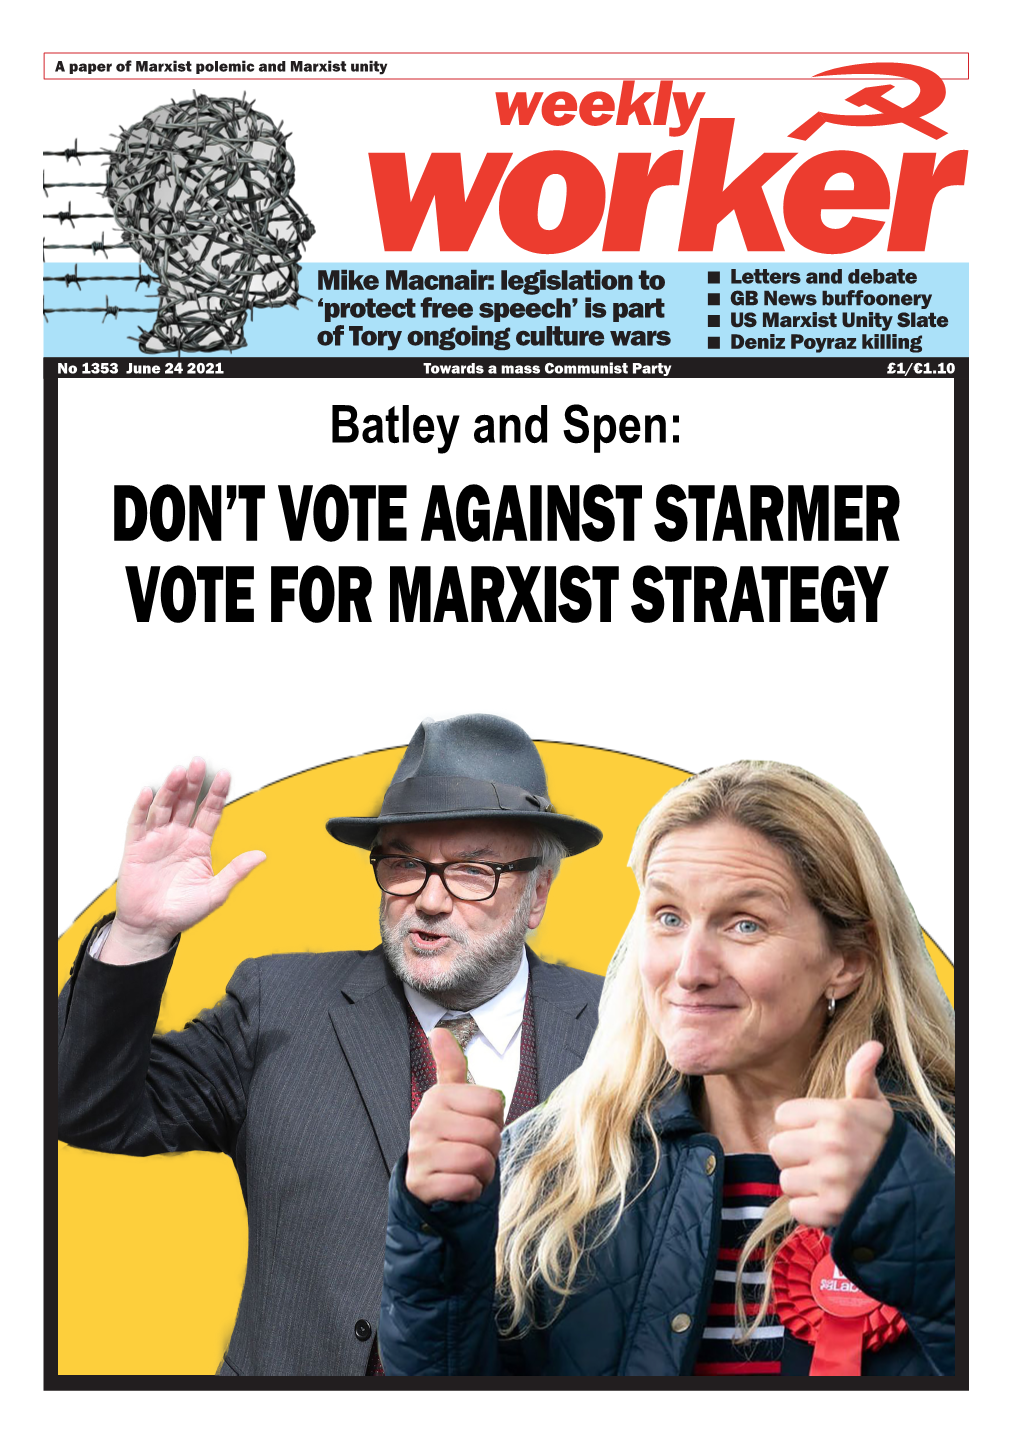 Batley and Spen: DON’T VOTE AGAINST STARMER VOTE for MARXIST STRATEGY Weekly 2 June 24 2021 1353 Worker LETTERS